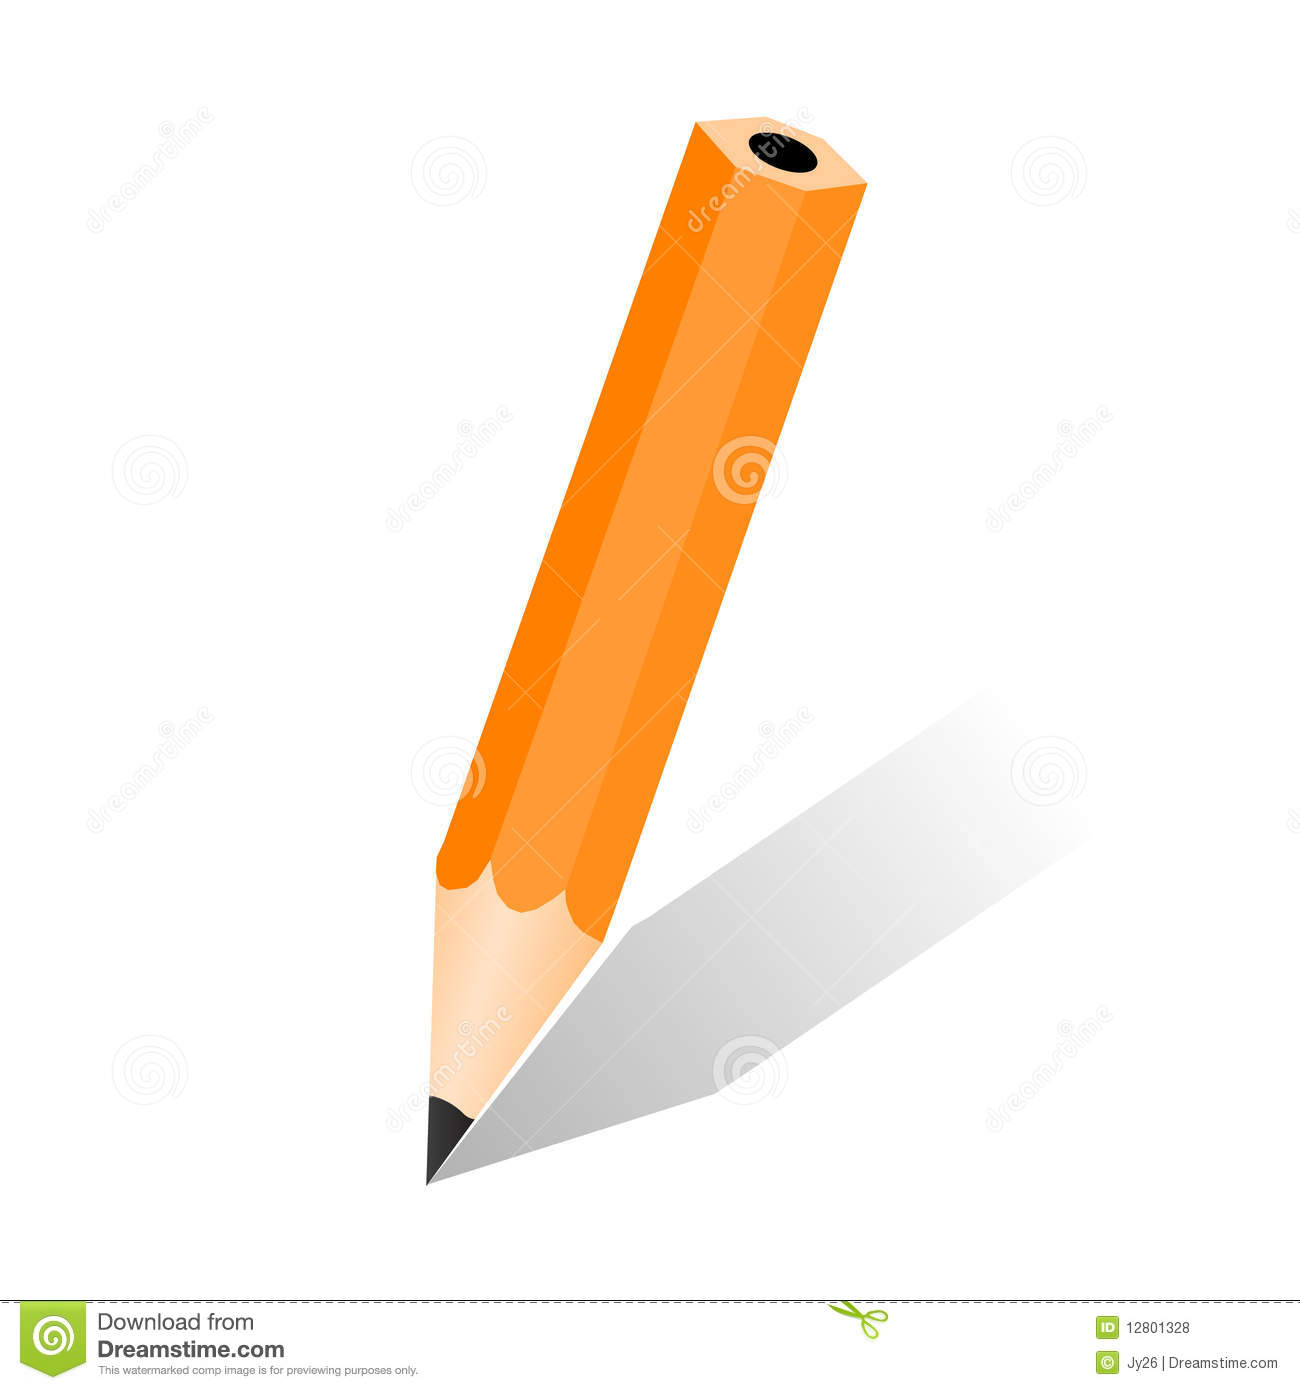 Free Vector Pencil Icons